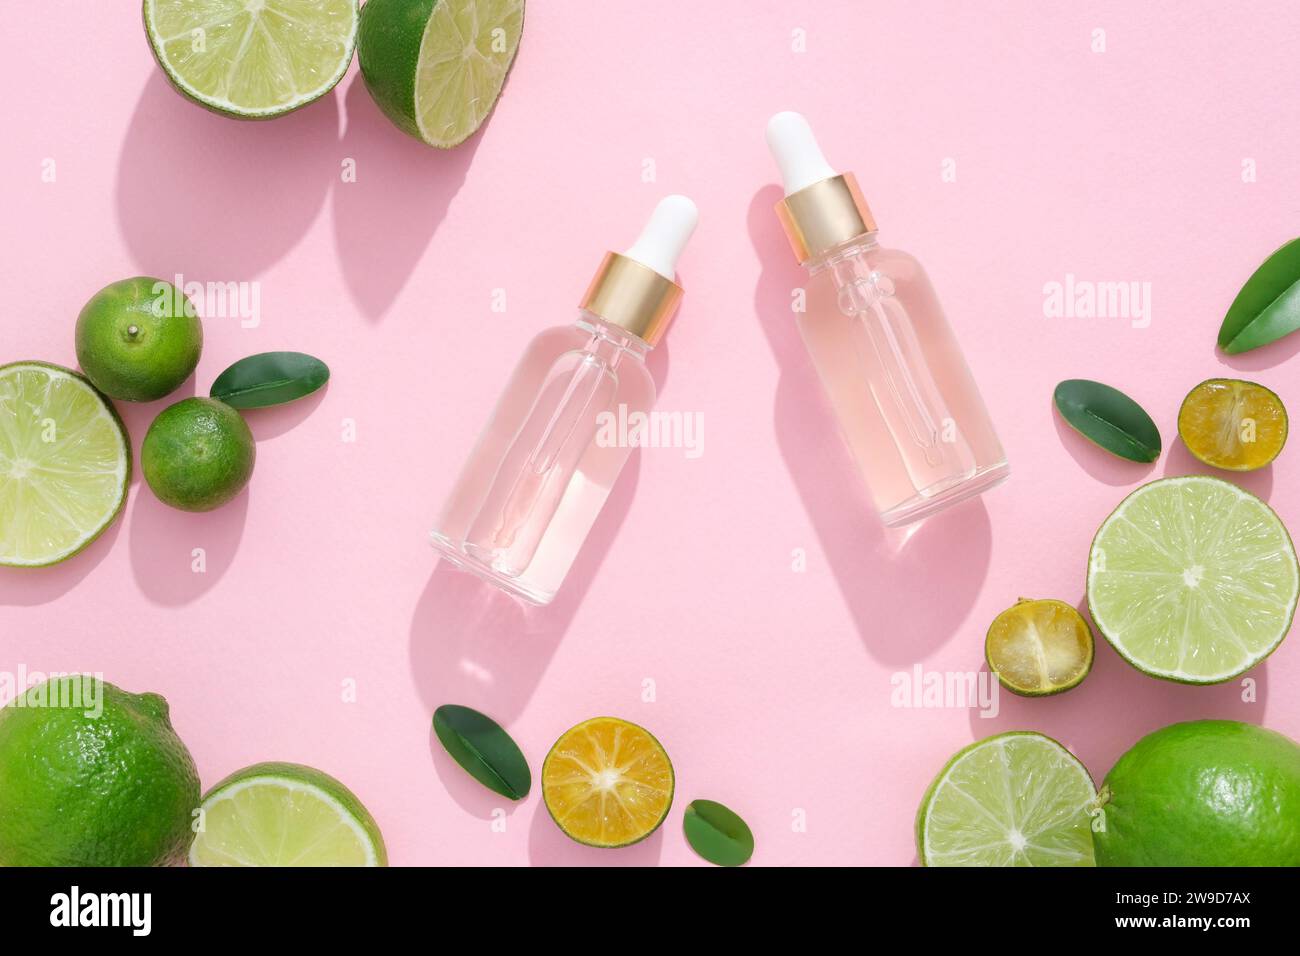 Scene for advertising cosmetic product with ingredient from natural. Kumquat and lime slices decorated with glass dropper bottles on a pink background Stock Photo